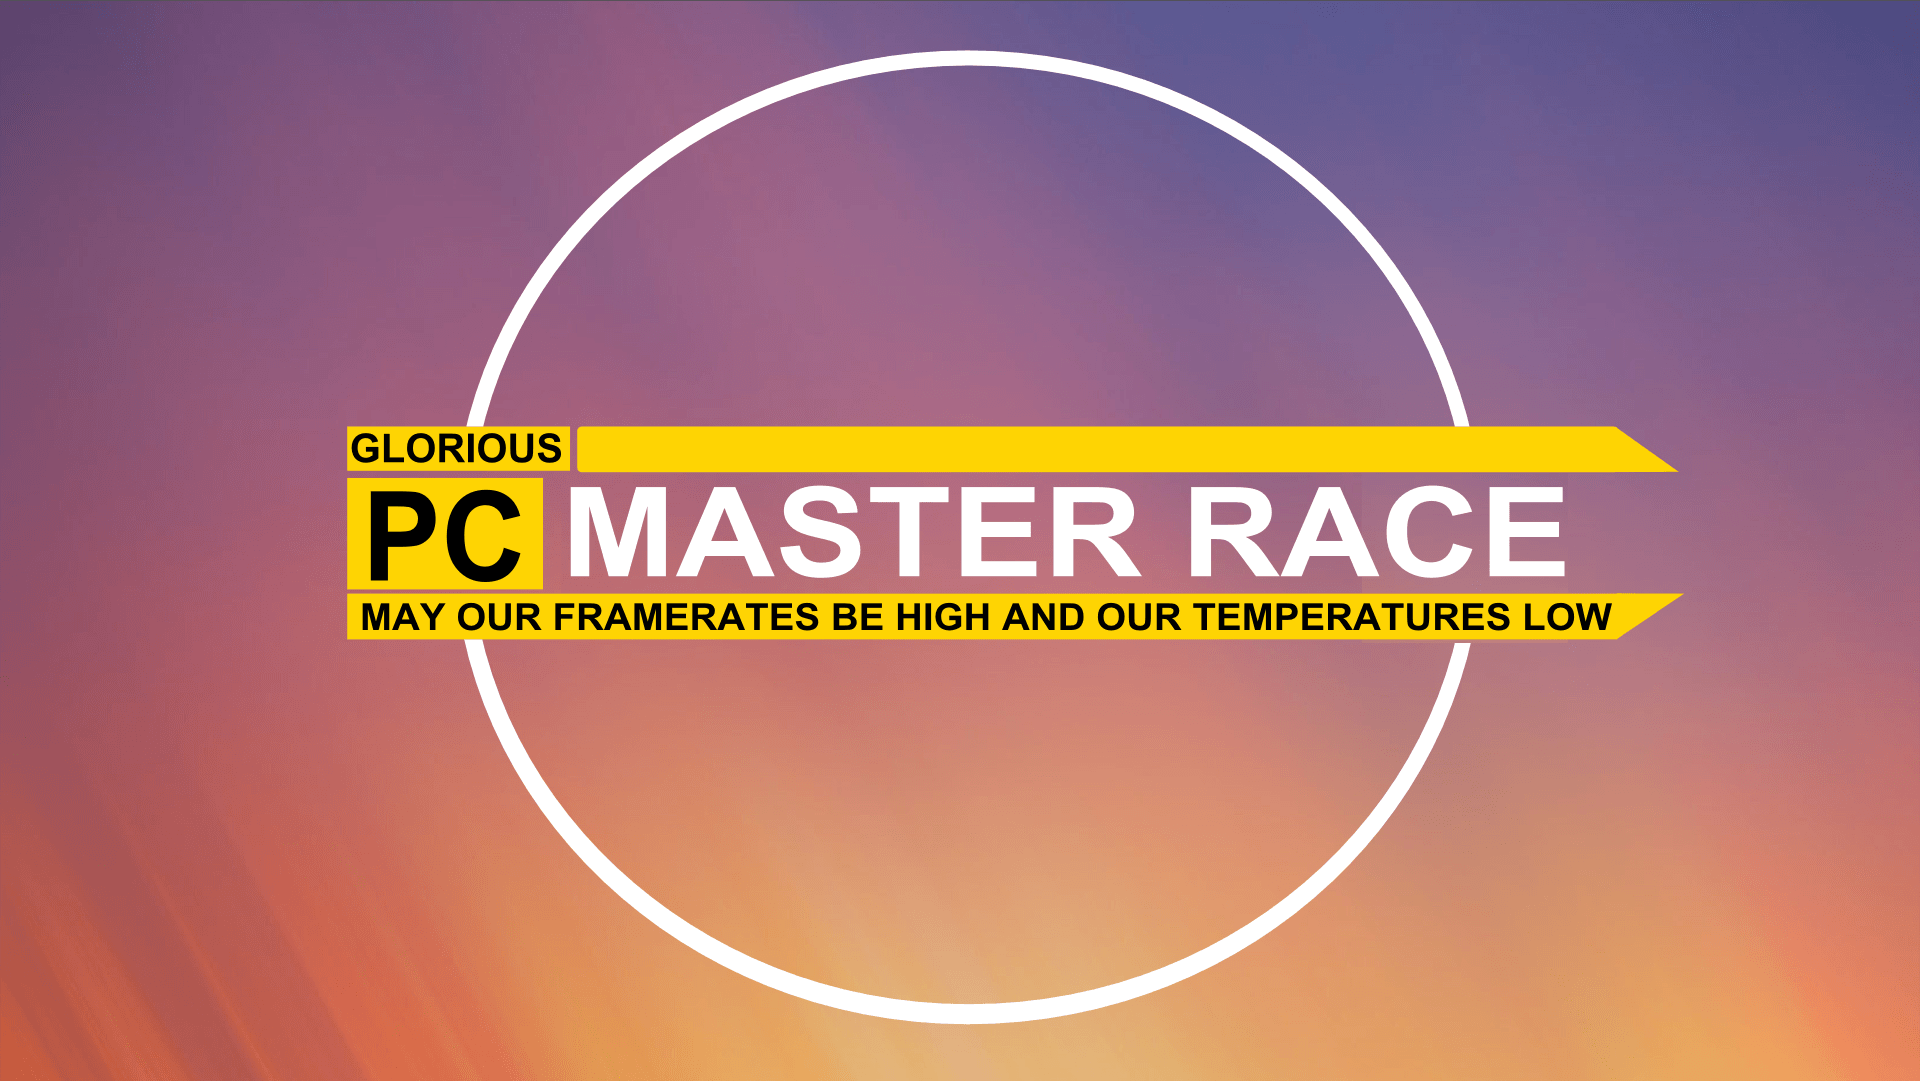 PC MASTER RACE Full HD Wallpaper and Background Imagex1081